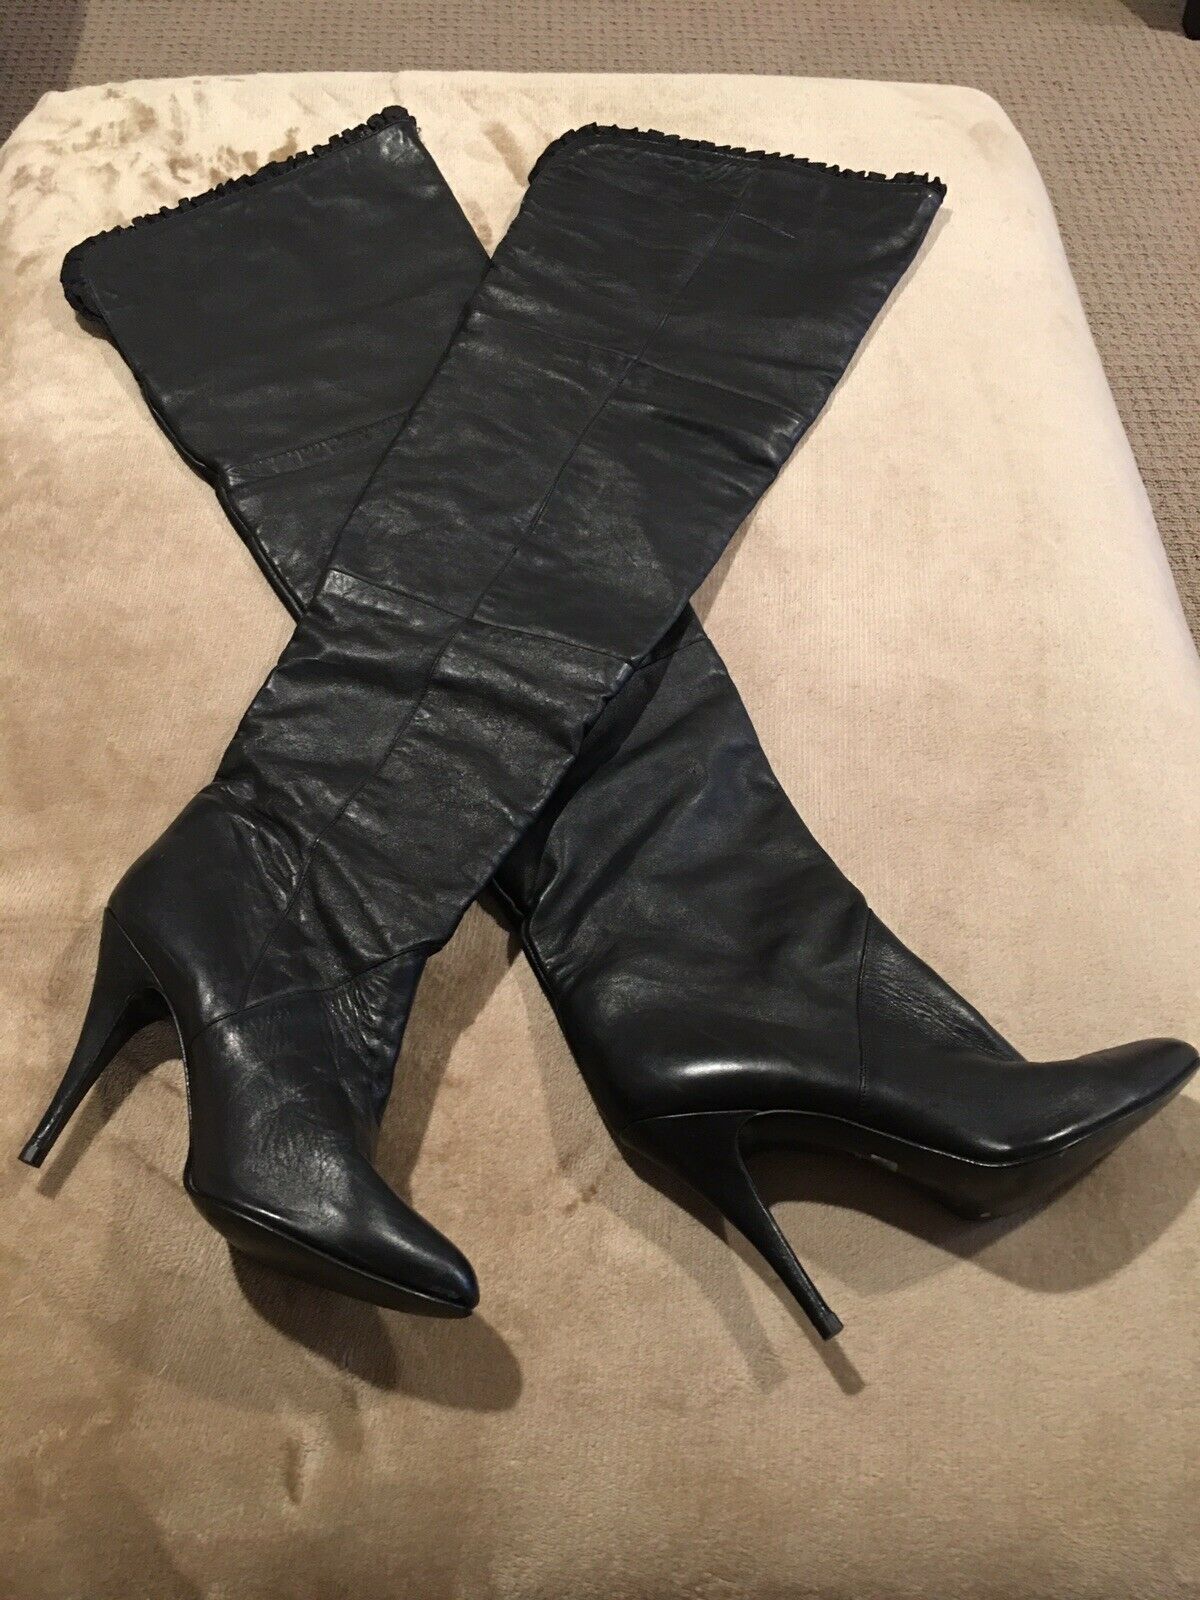 thigh high leather boots for sale